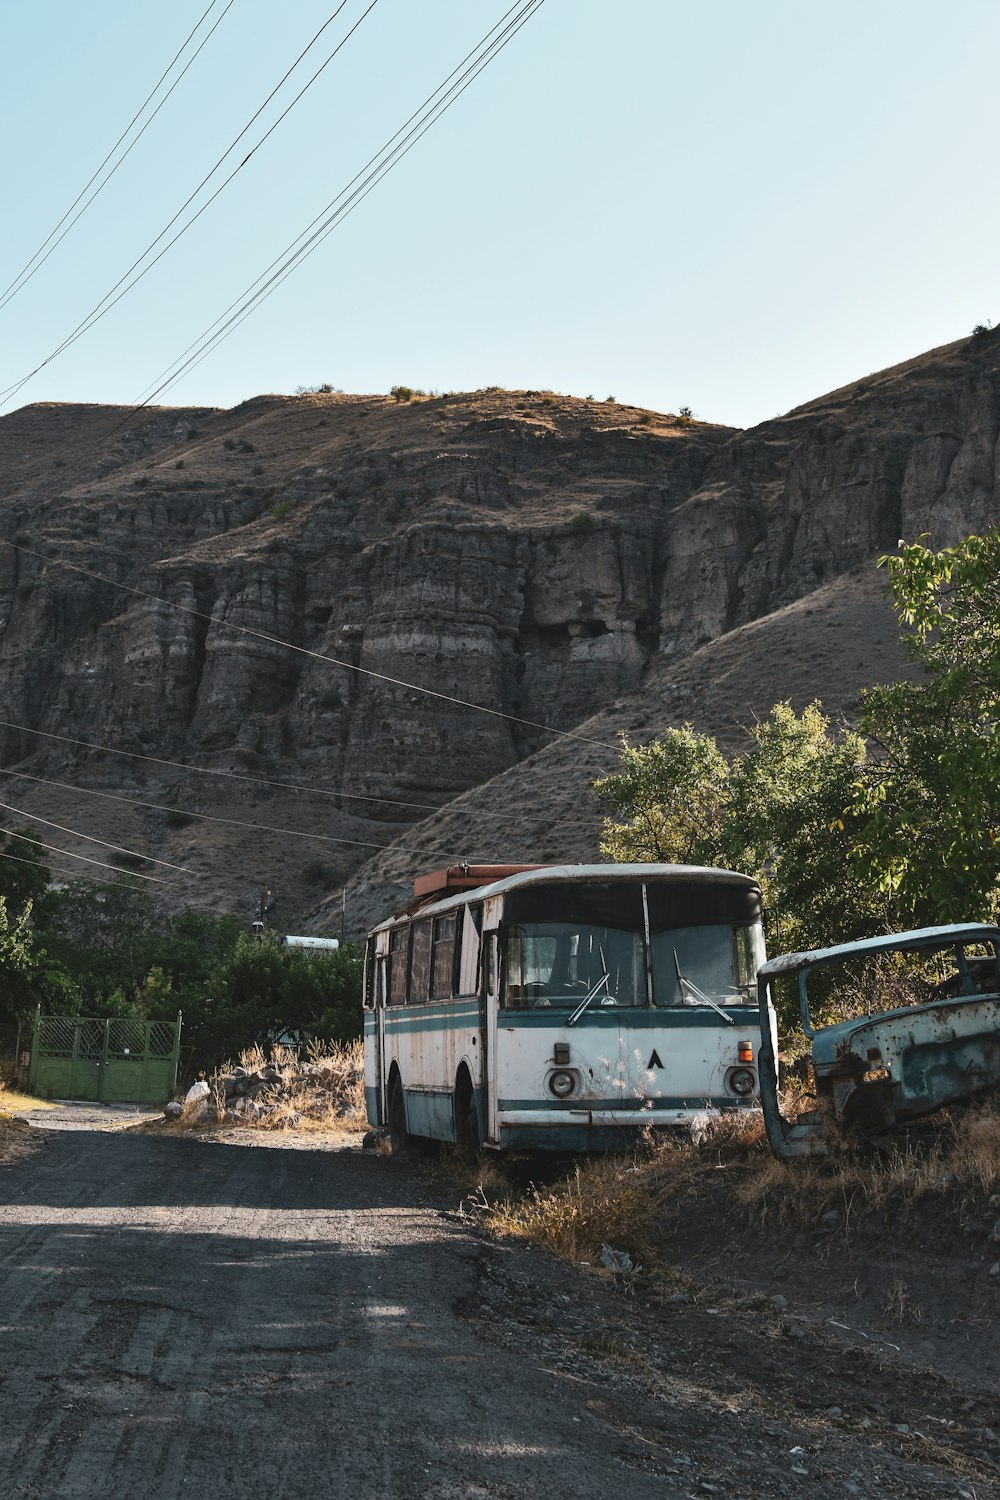 a bus parked on the side of a dirt road